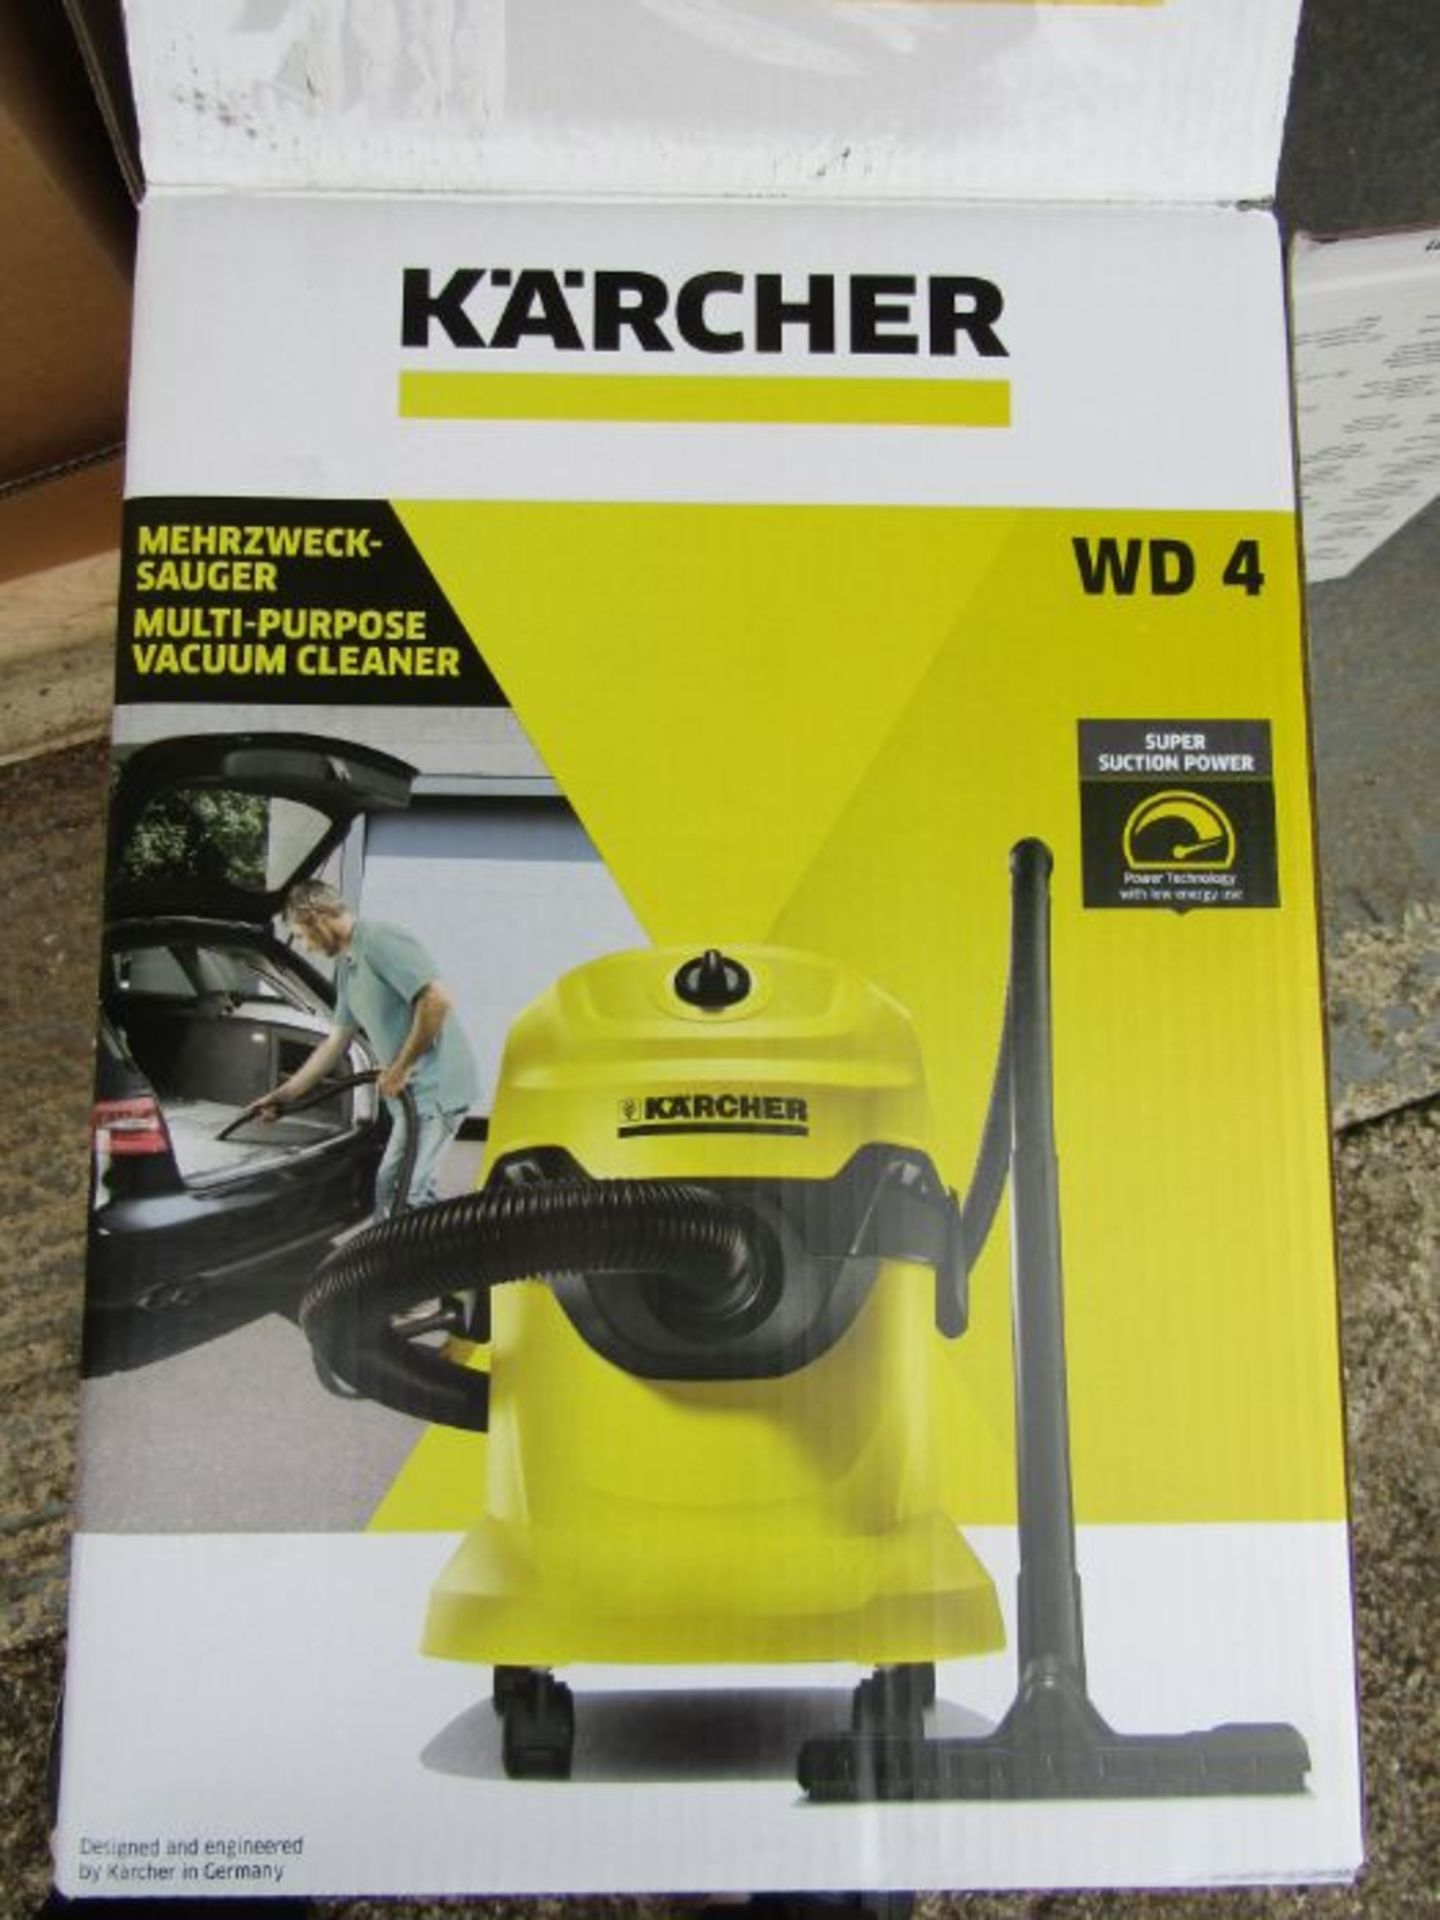 Karcher WD 4 Wet and Dry Vacuum Cleaner - Yellow - UK Plug Blk 1931654 - Image 4 of 6